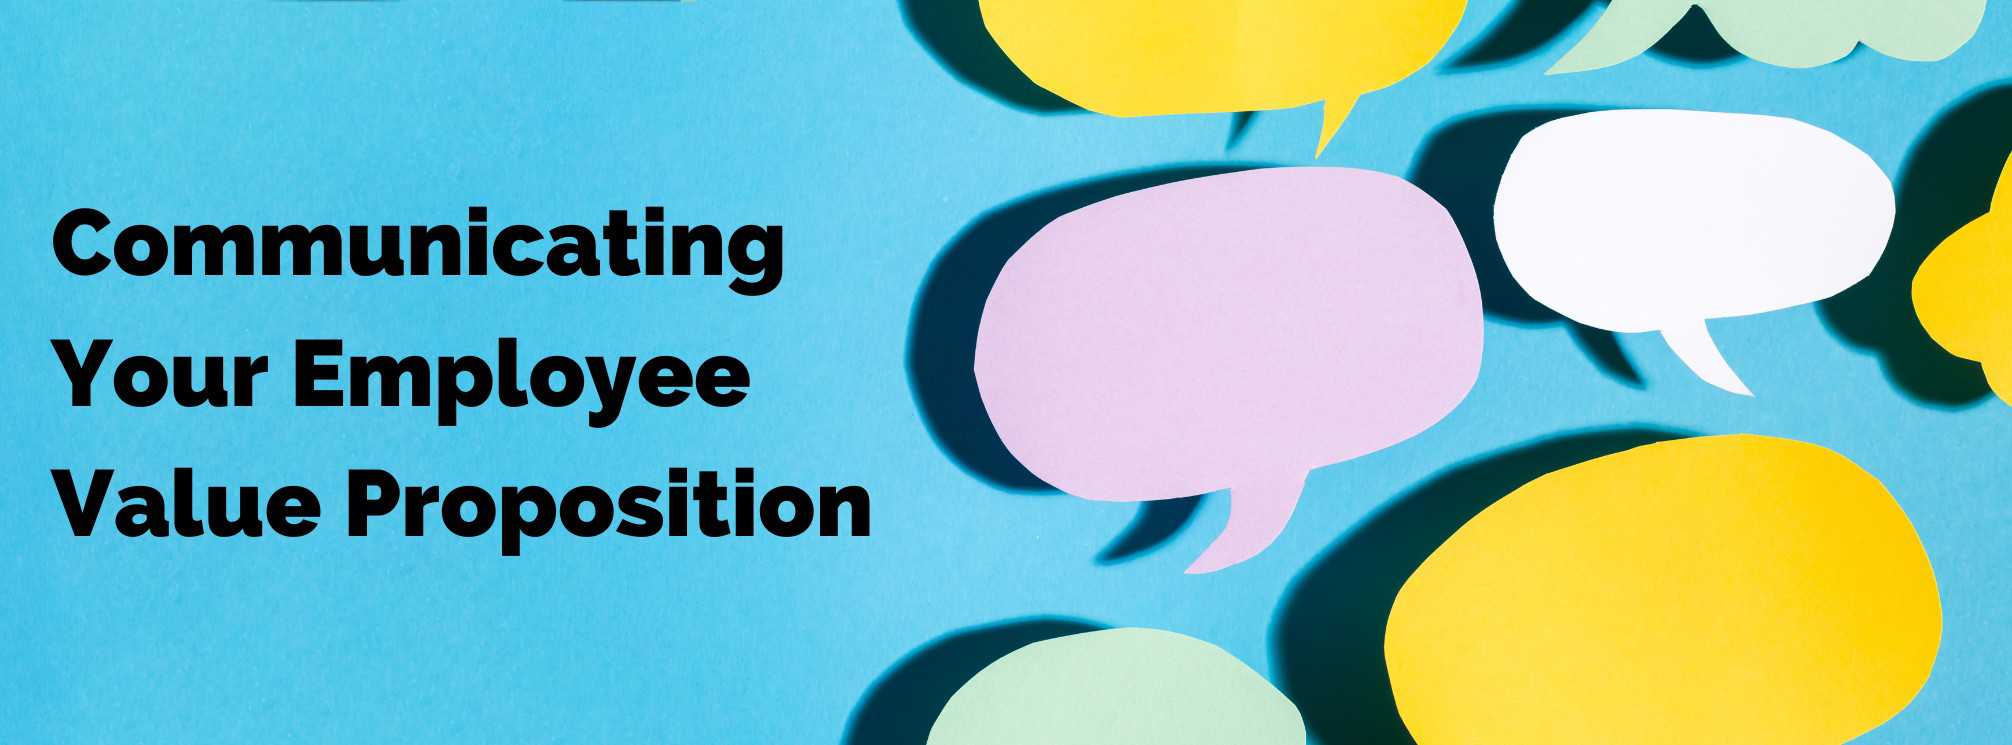 graphic with colorful speech bubbles and the words "communicating your employee value proposition"